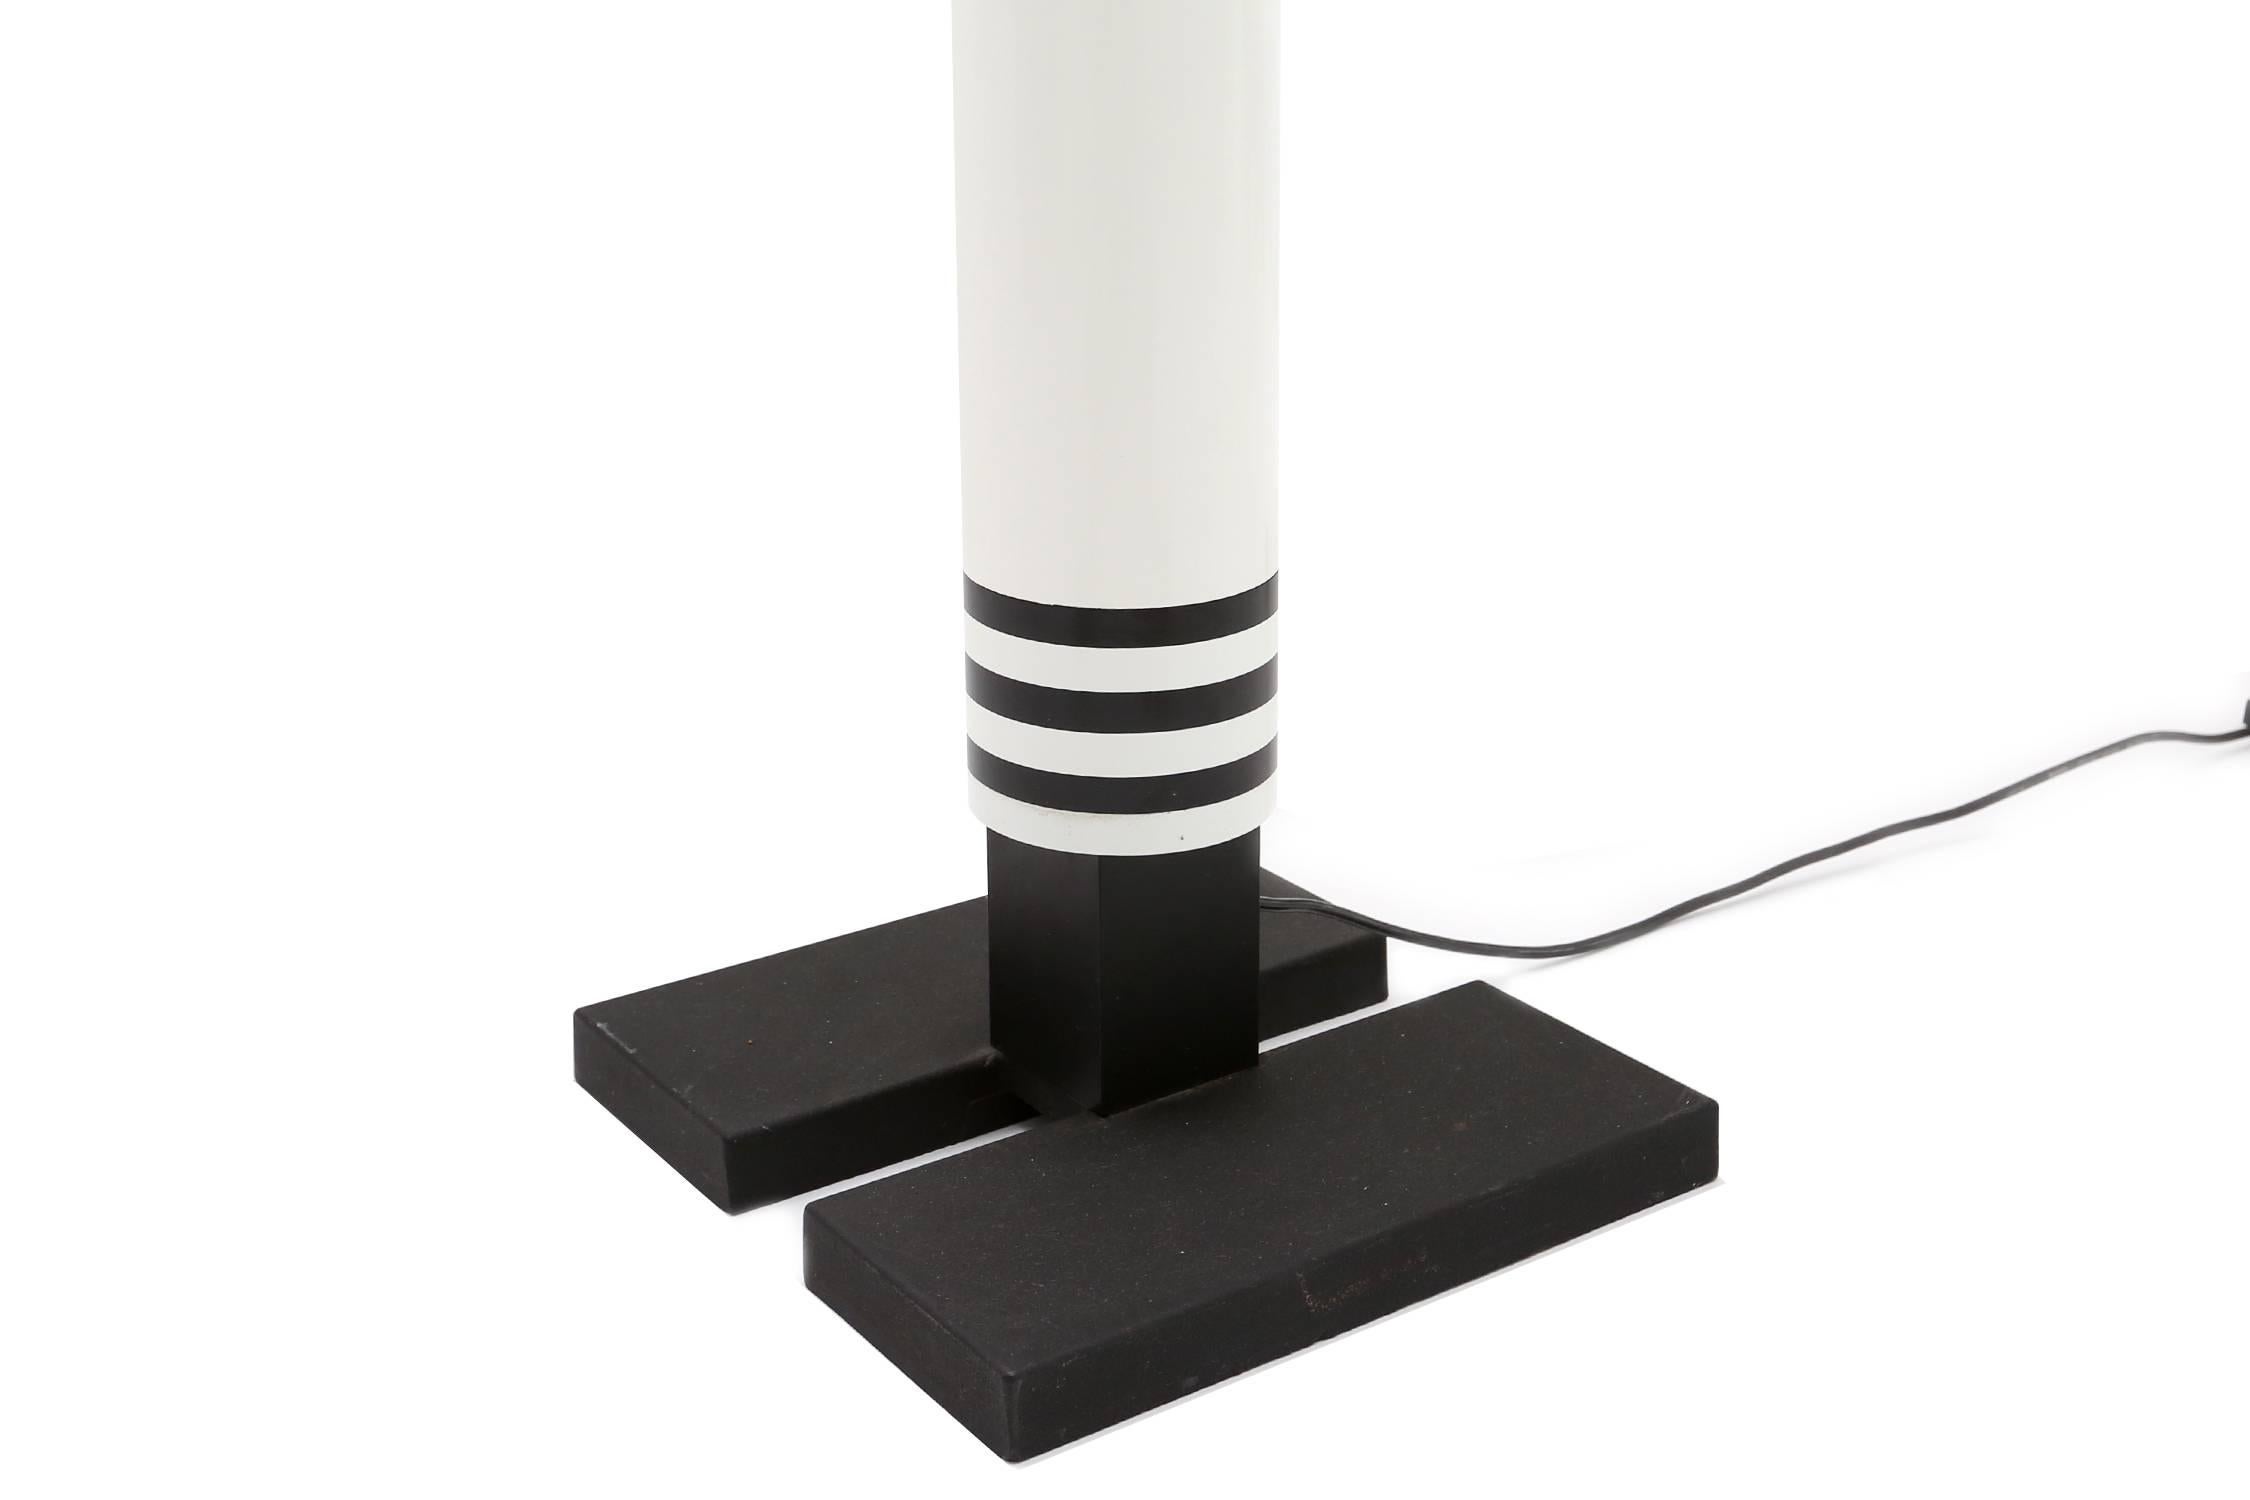 A Classic Memphis floor lamp
by Mario Botta for Artemide, Italy, 1986.
The shogun floor lamp is no longer in production
cast iron base and white and black center stem with curved steel mesh shades at the top.
Measures: H 216 cm.